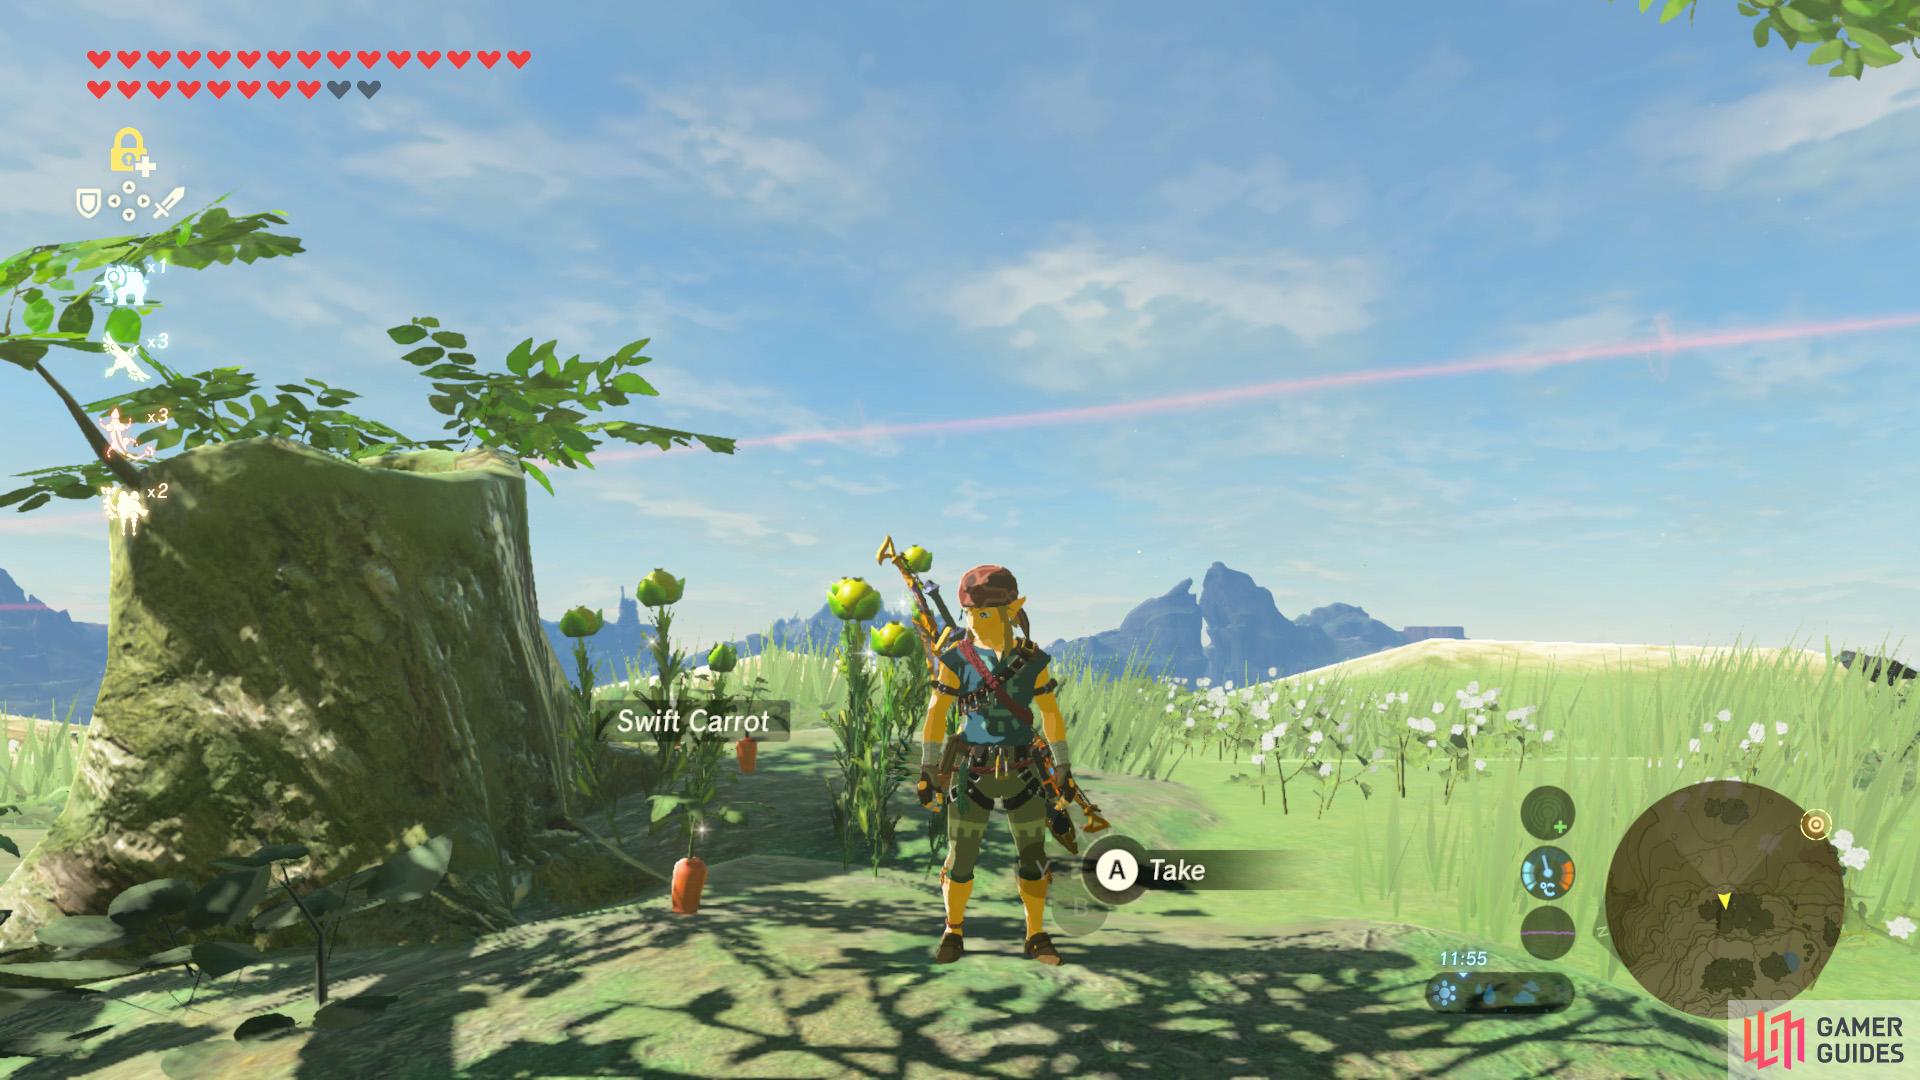 There are also many Hyrule Herbs nearby.